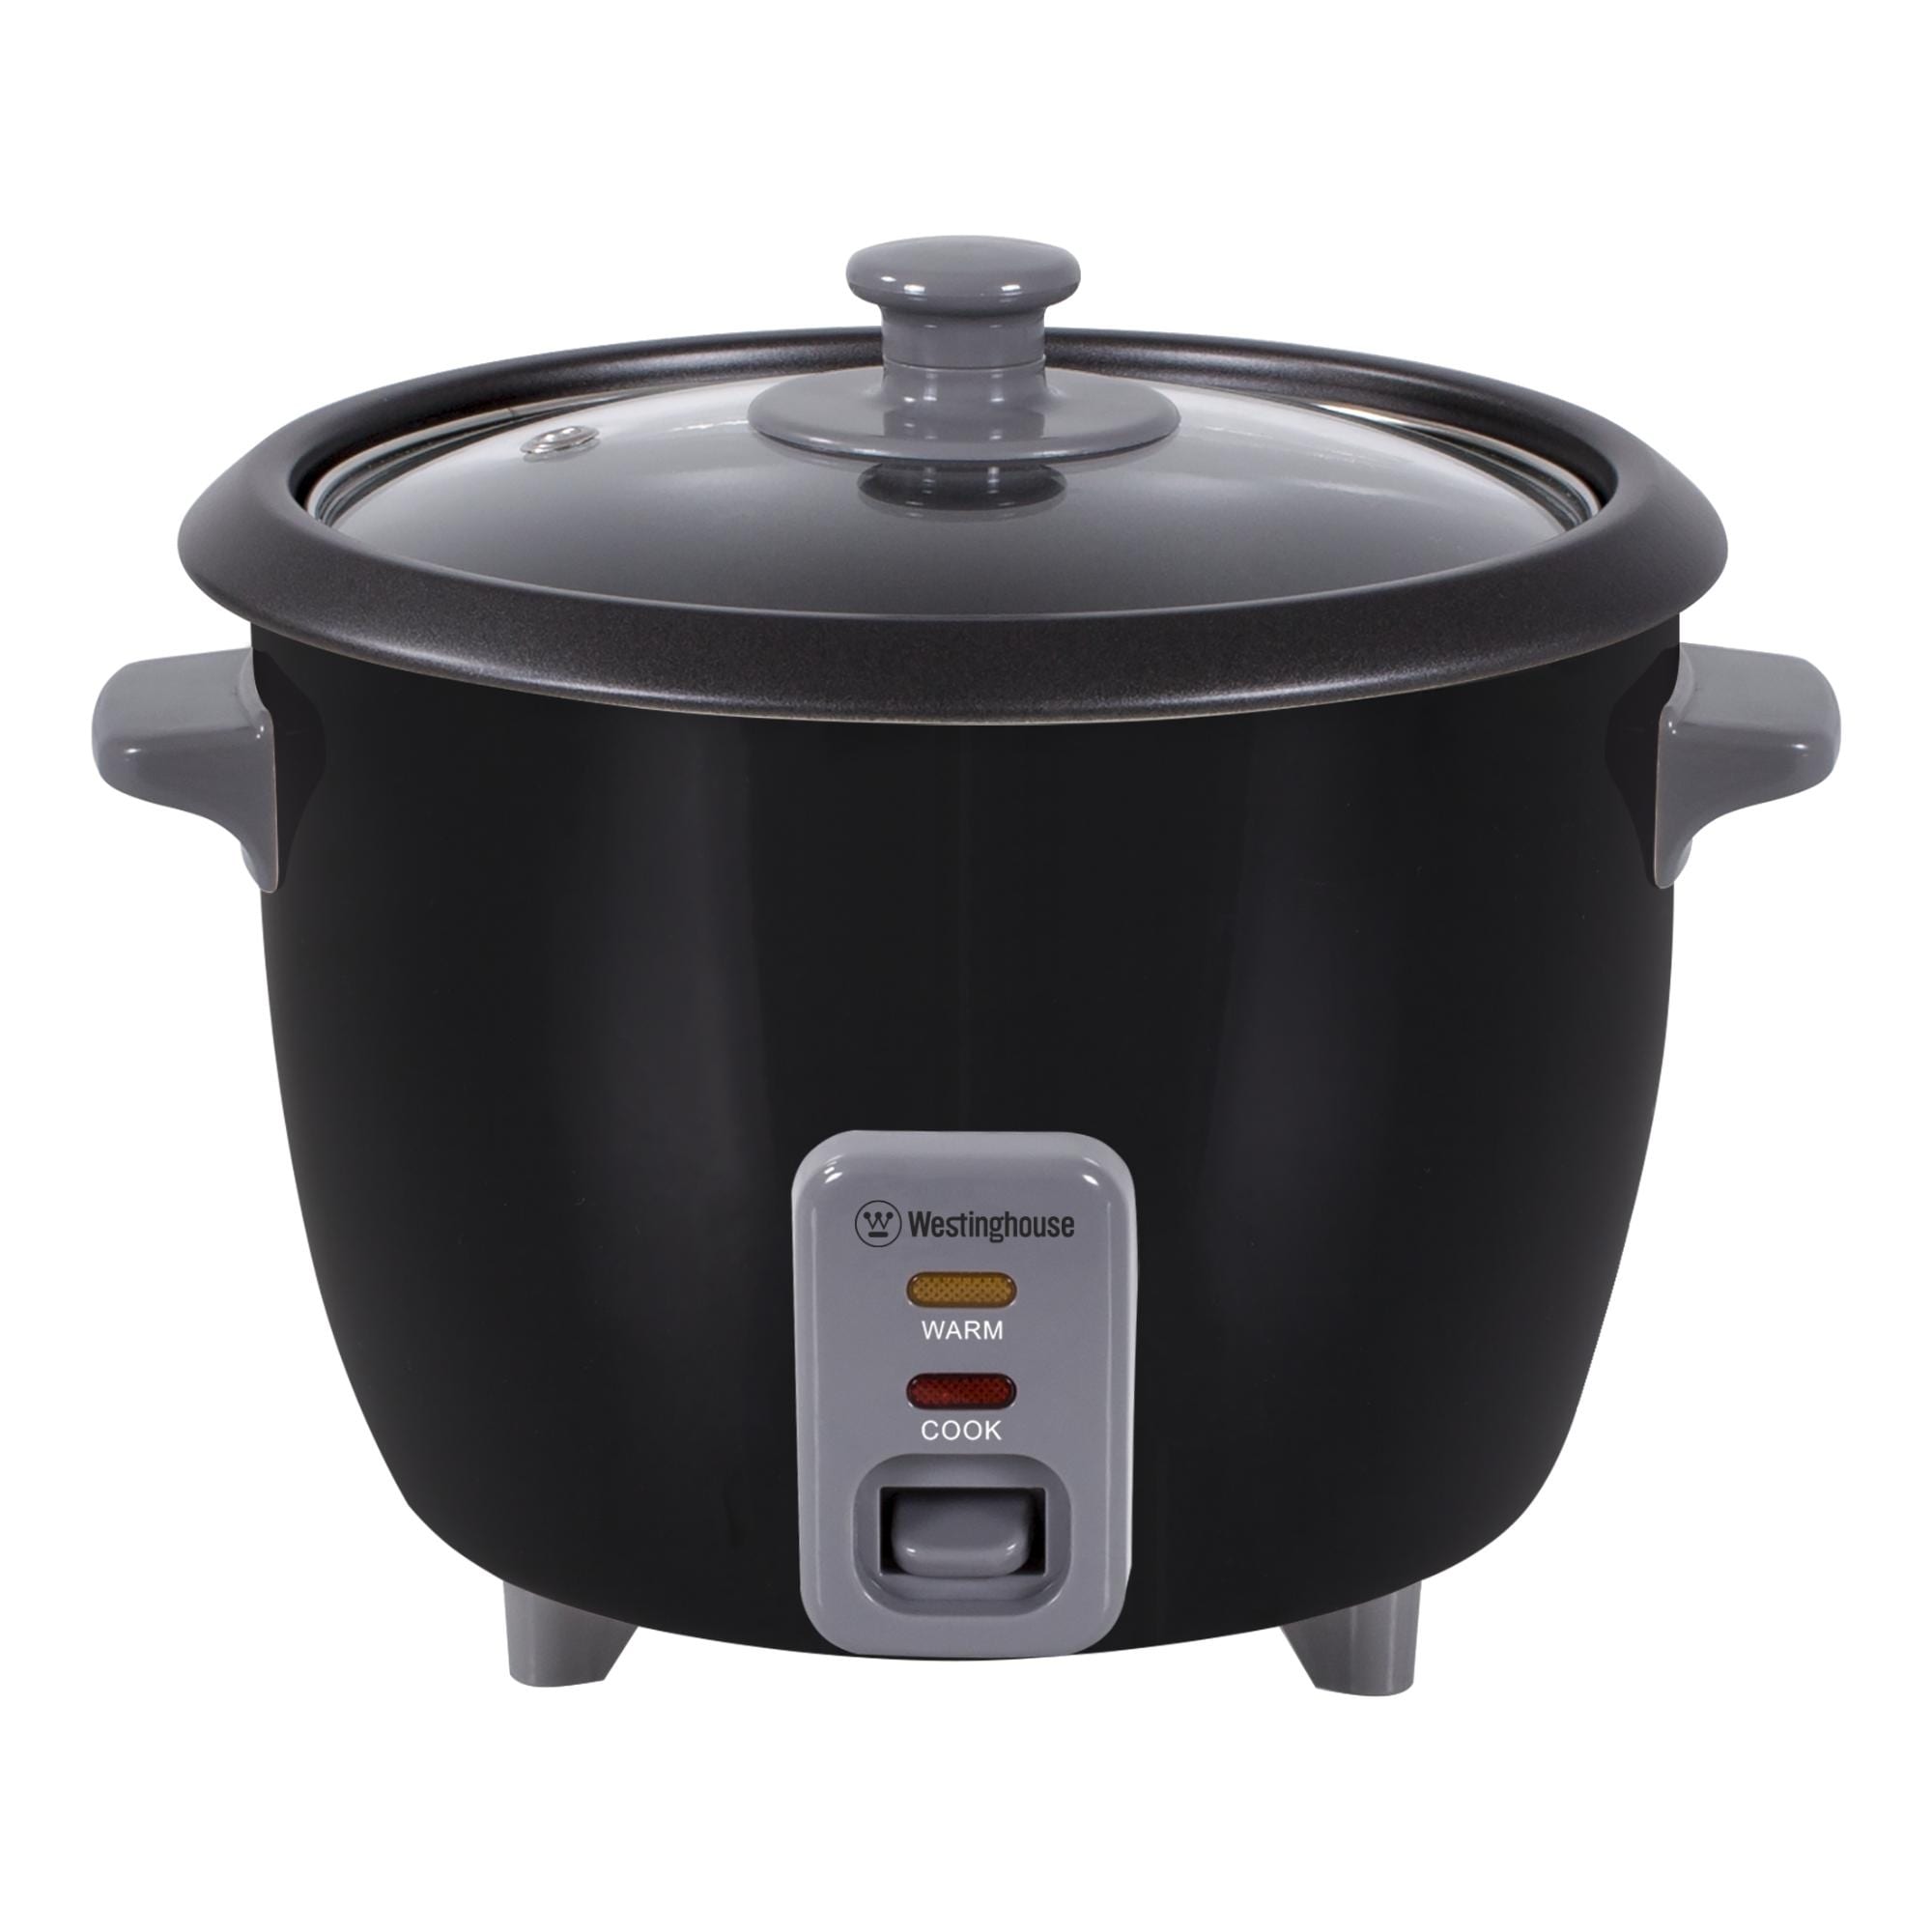 https://ak1.ostkcdn.com/images/products/is/images/direct/be43219d0ed72da0dee49523f4e71e4aac1e30ca/3-Cup-Rice-Cooker.jpg